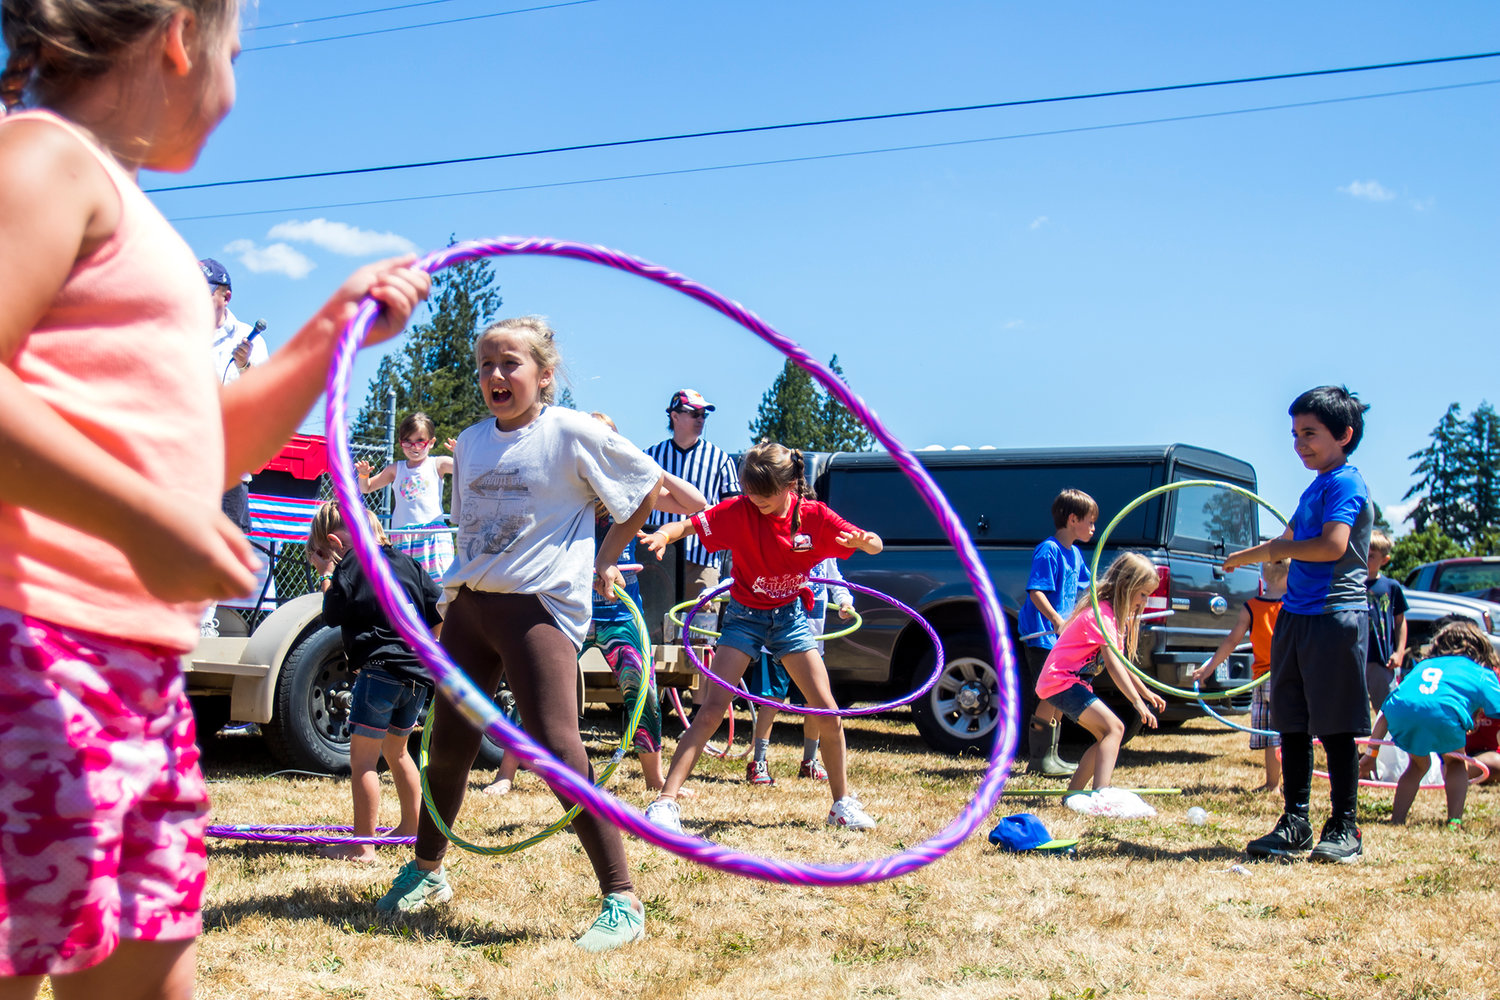 Kids play with hula-hoops during the annual Funtime Festival held in 2018.